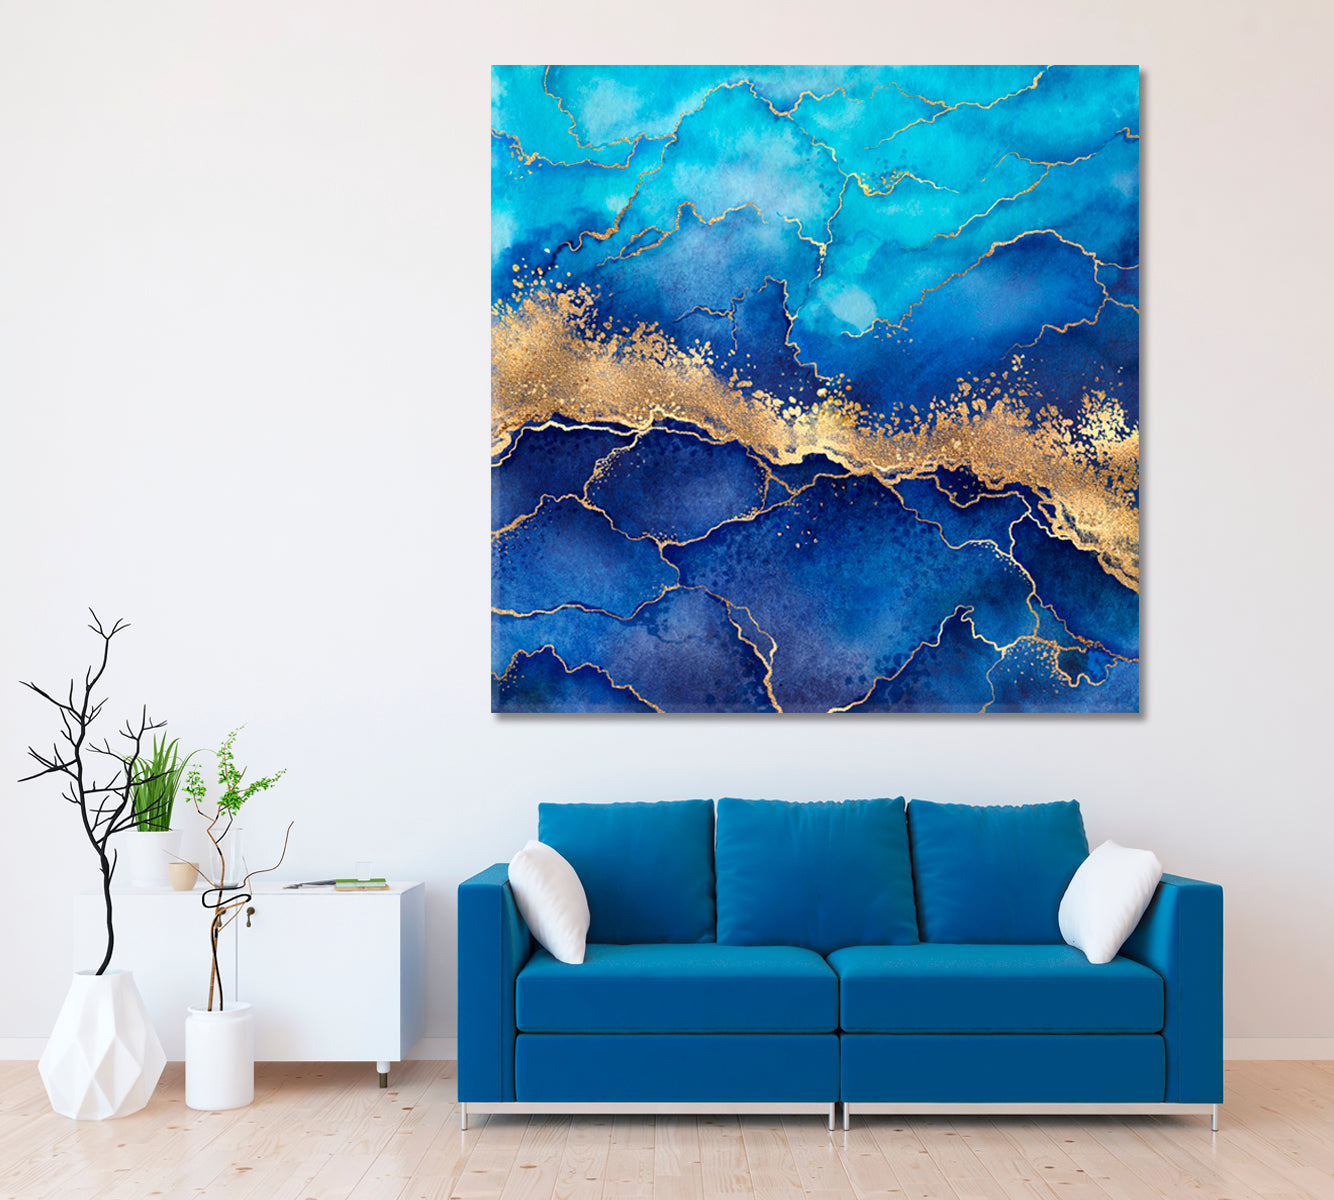 Abstract Blue Marble with Golden Veins Canvas Print ArtLexy   